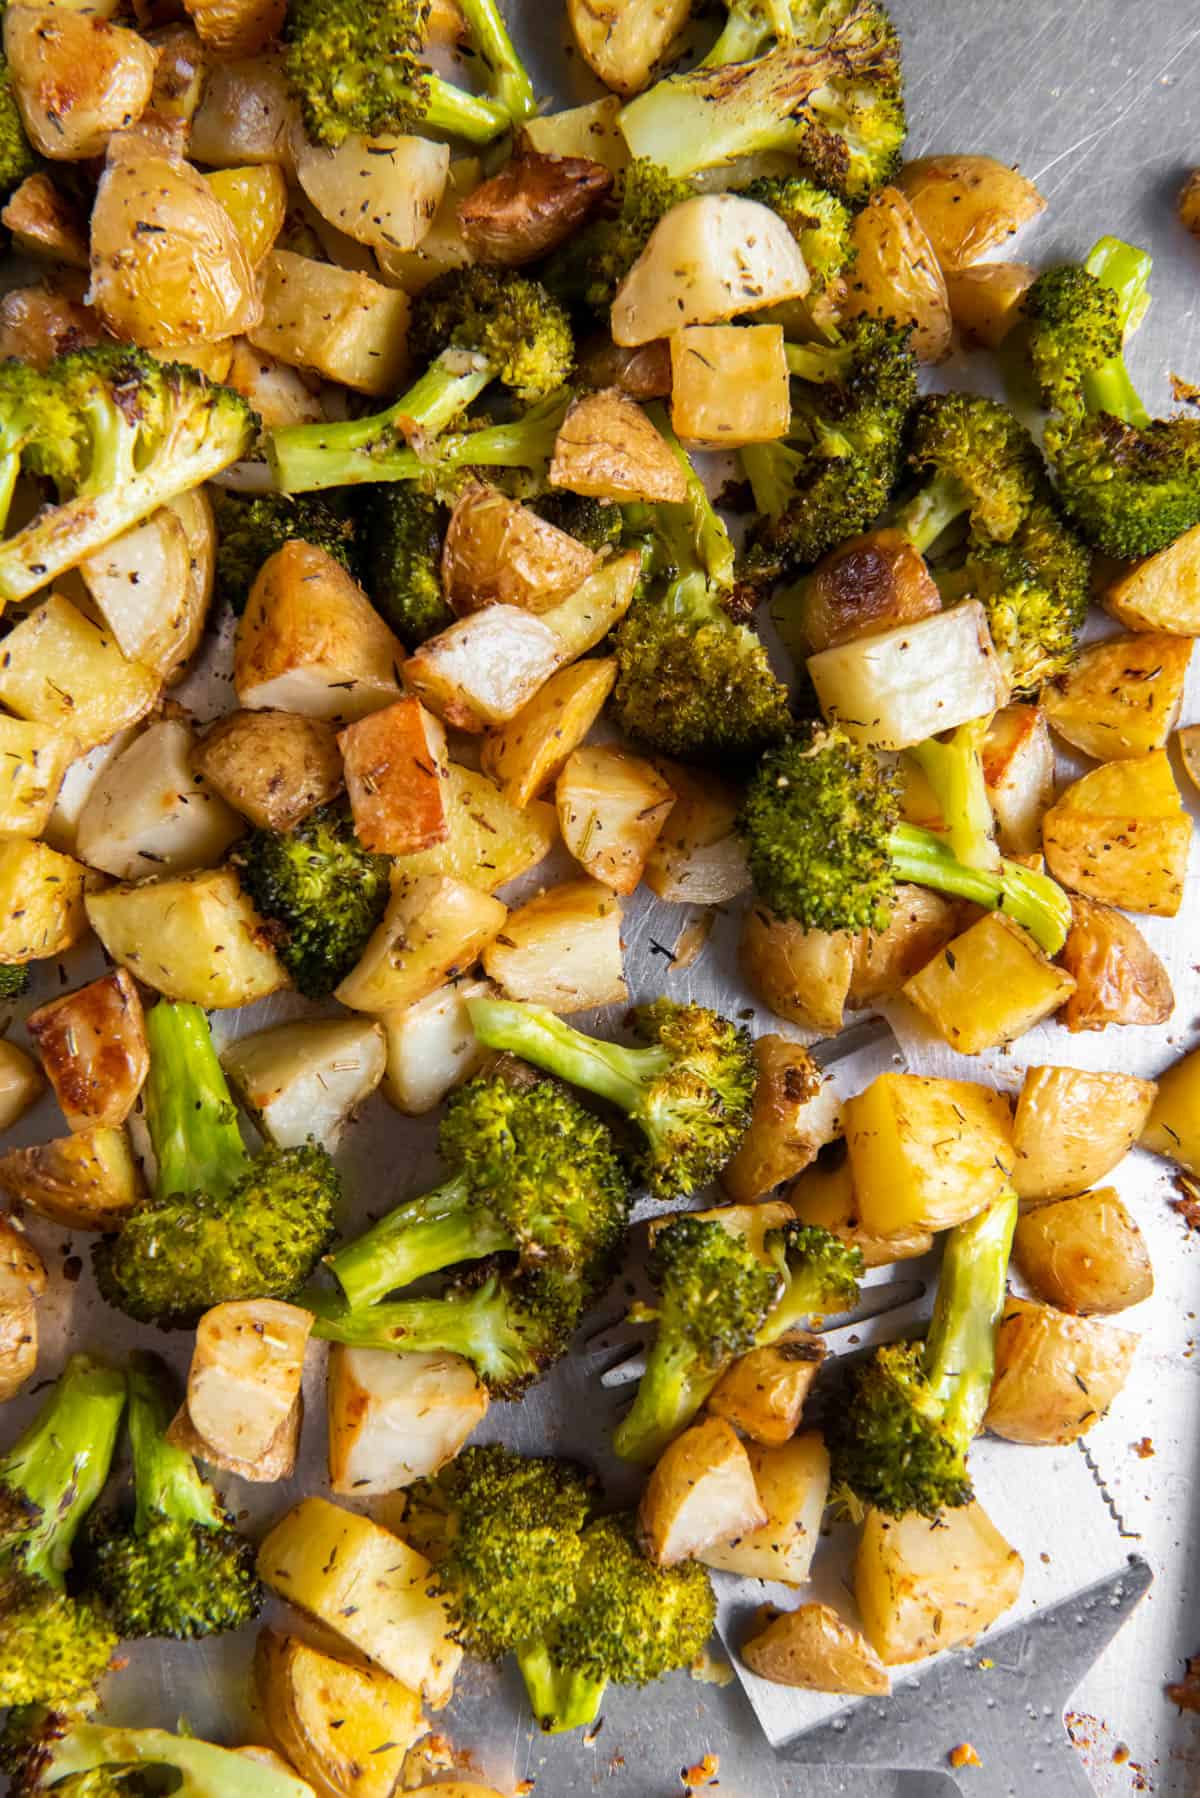 Oven roasted potatoes and broccoli on a sheet pan after baking.